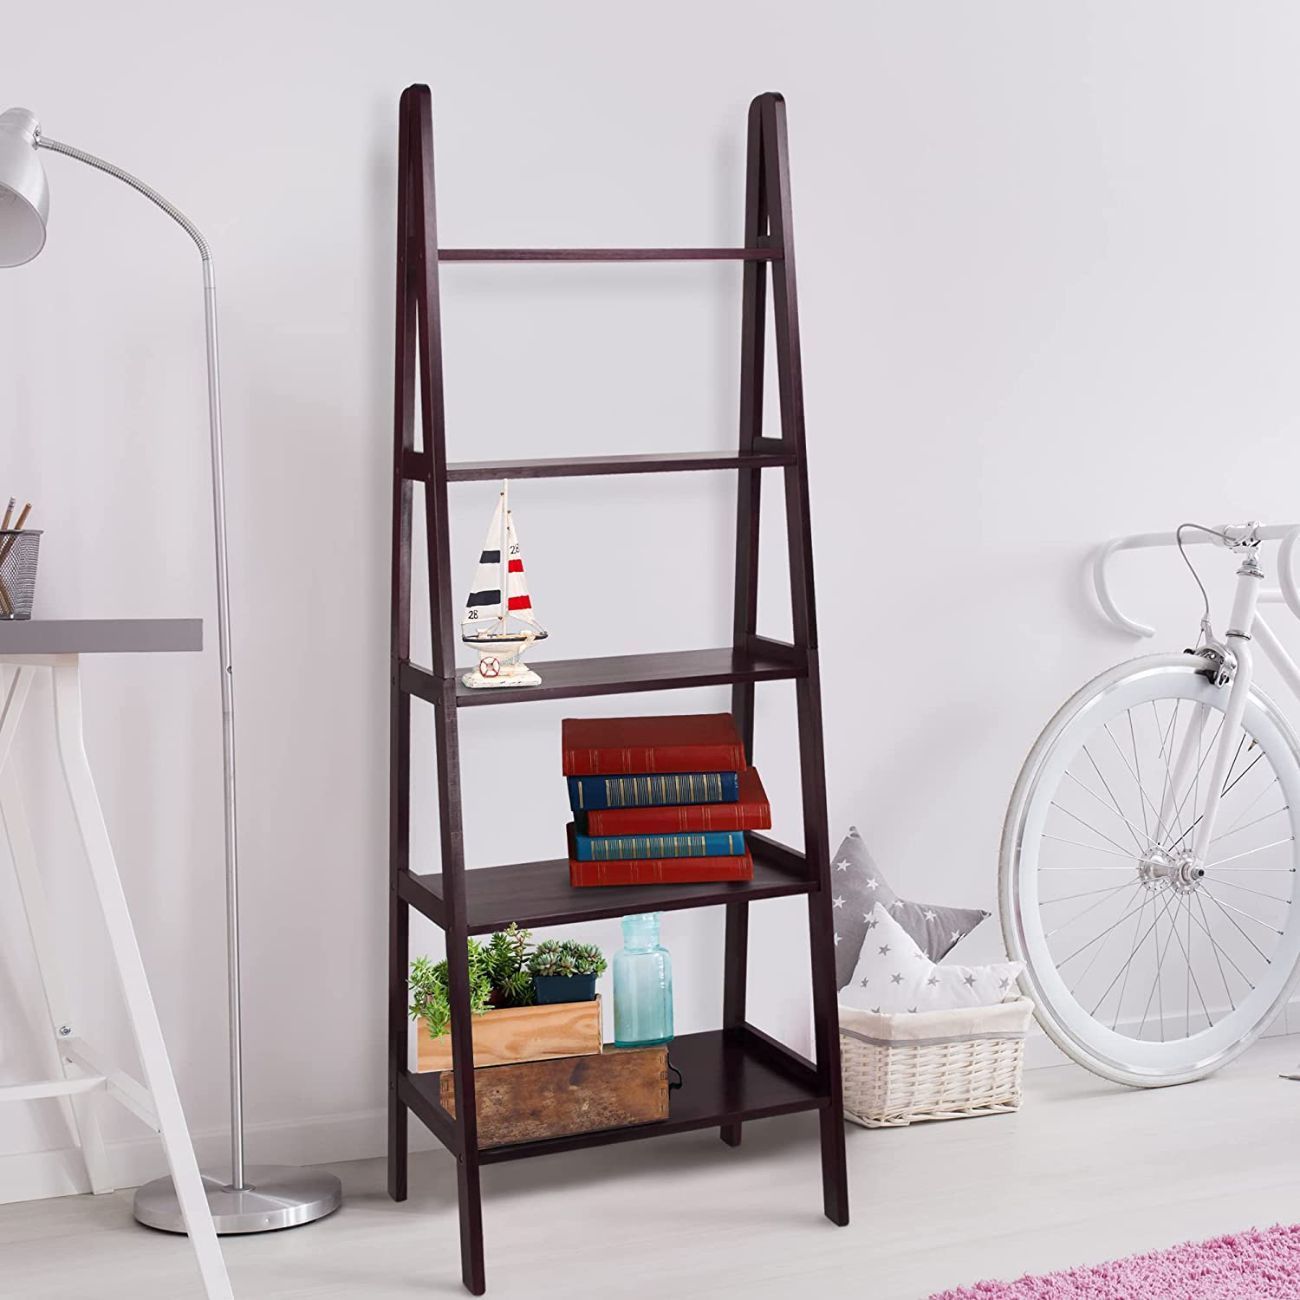 The Best Gold Bookshelf For Your Home: Our Top 5 Picks